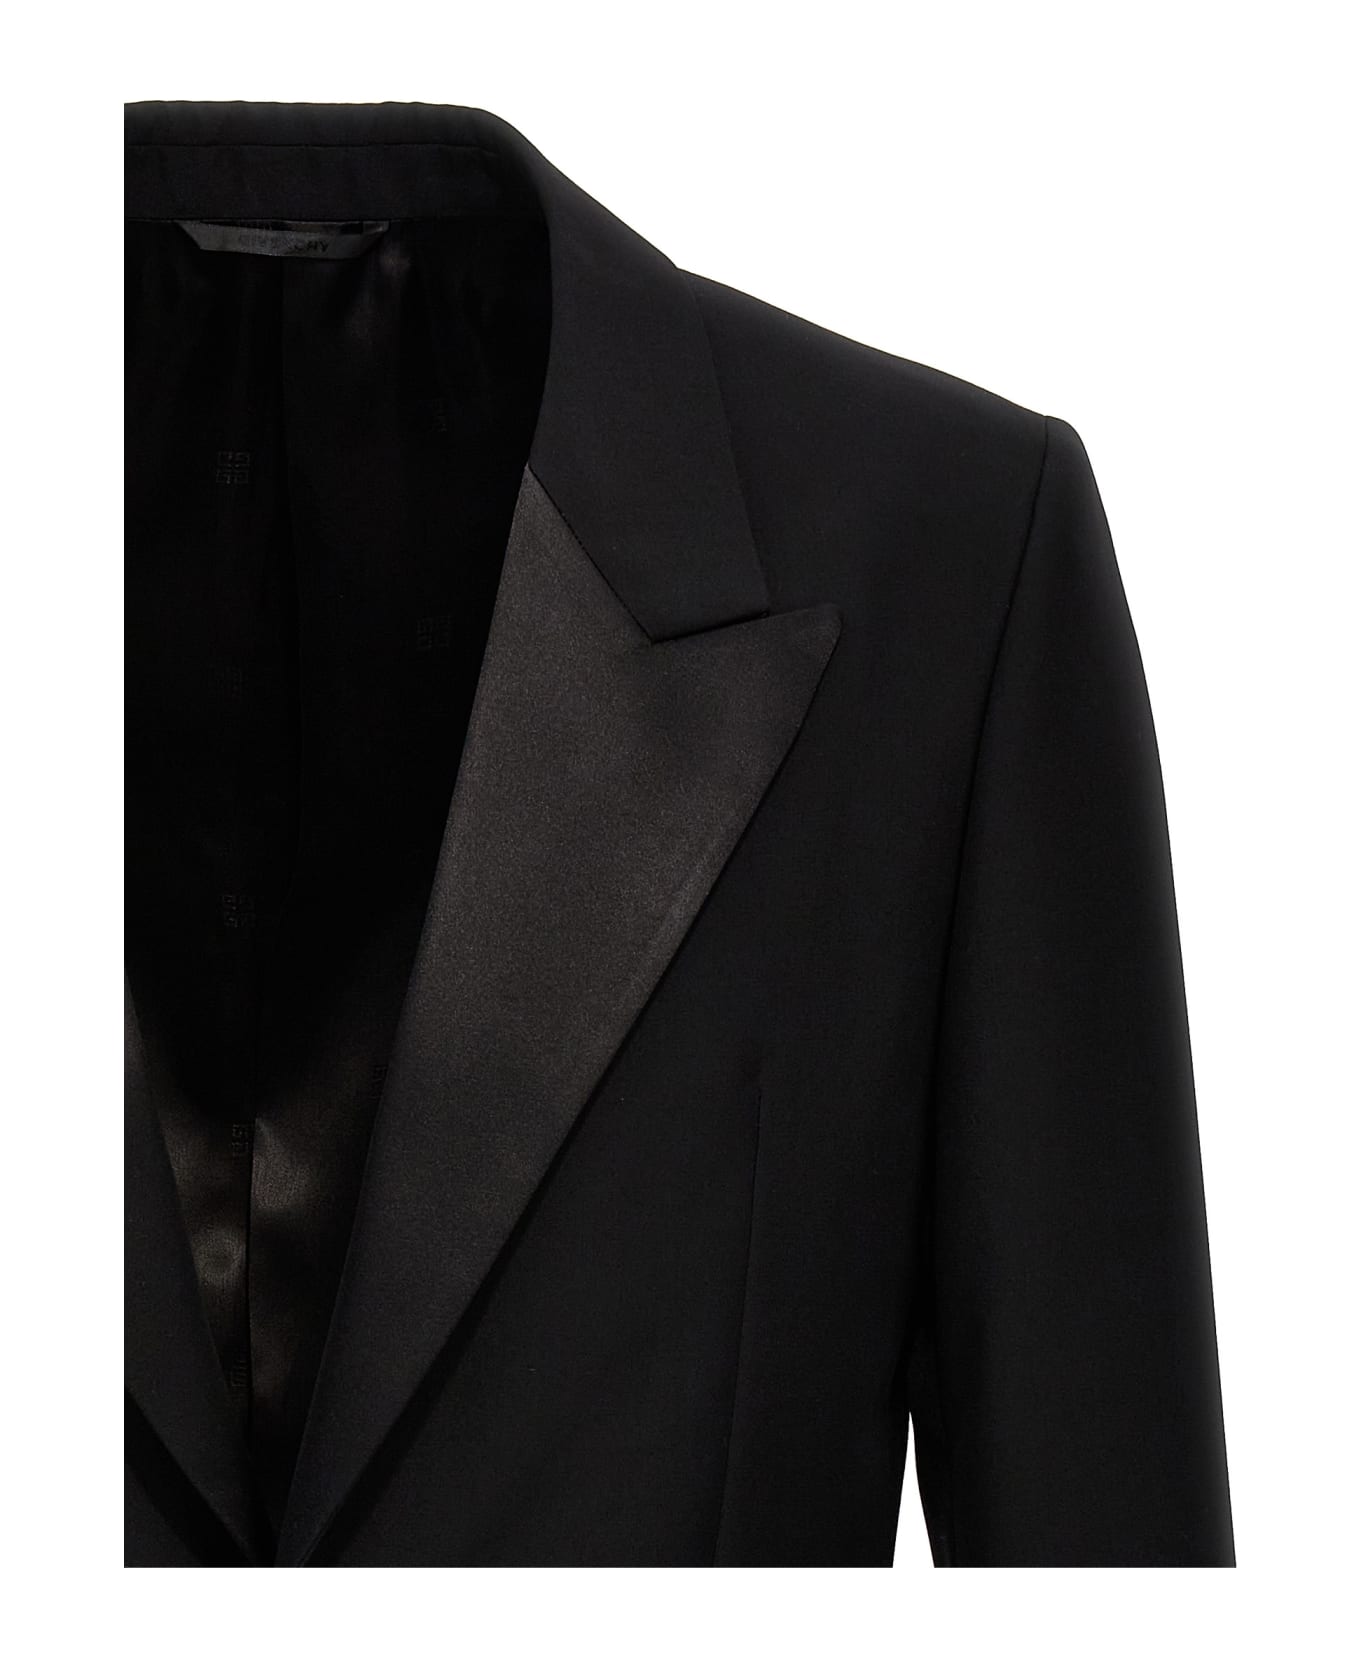 Givenchy Double-breasted Wool Blazer - Black